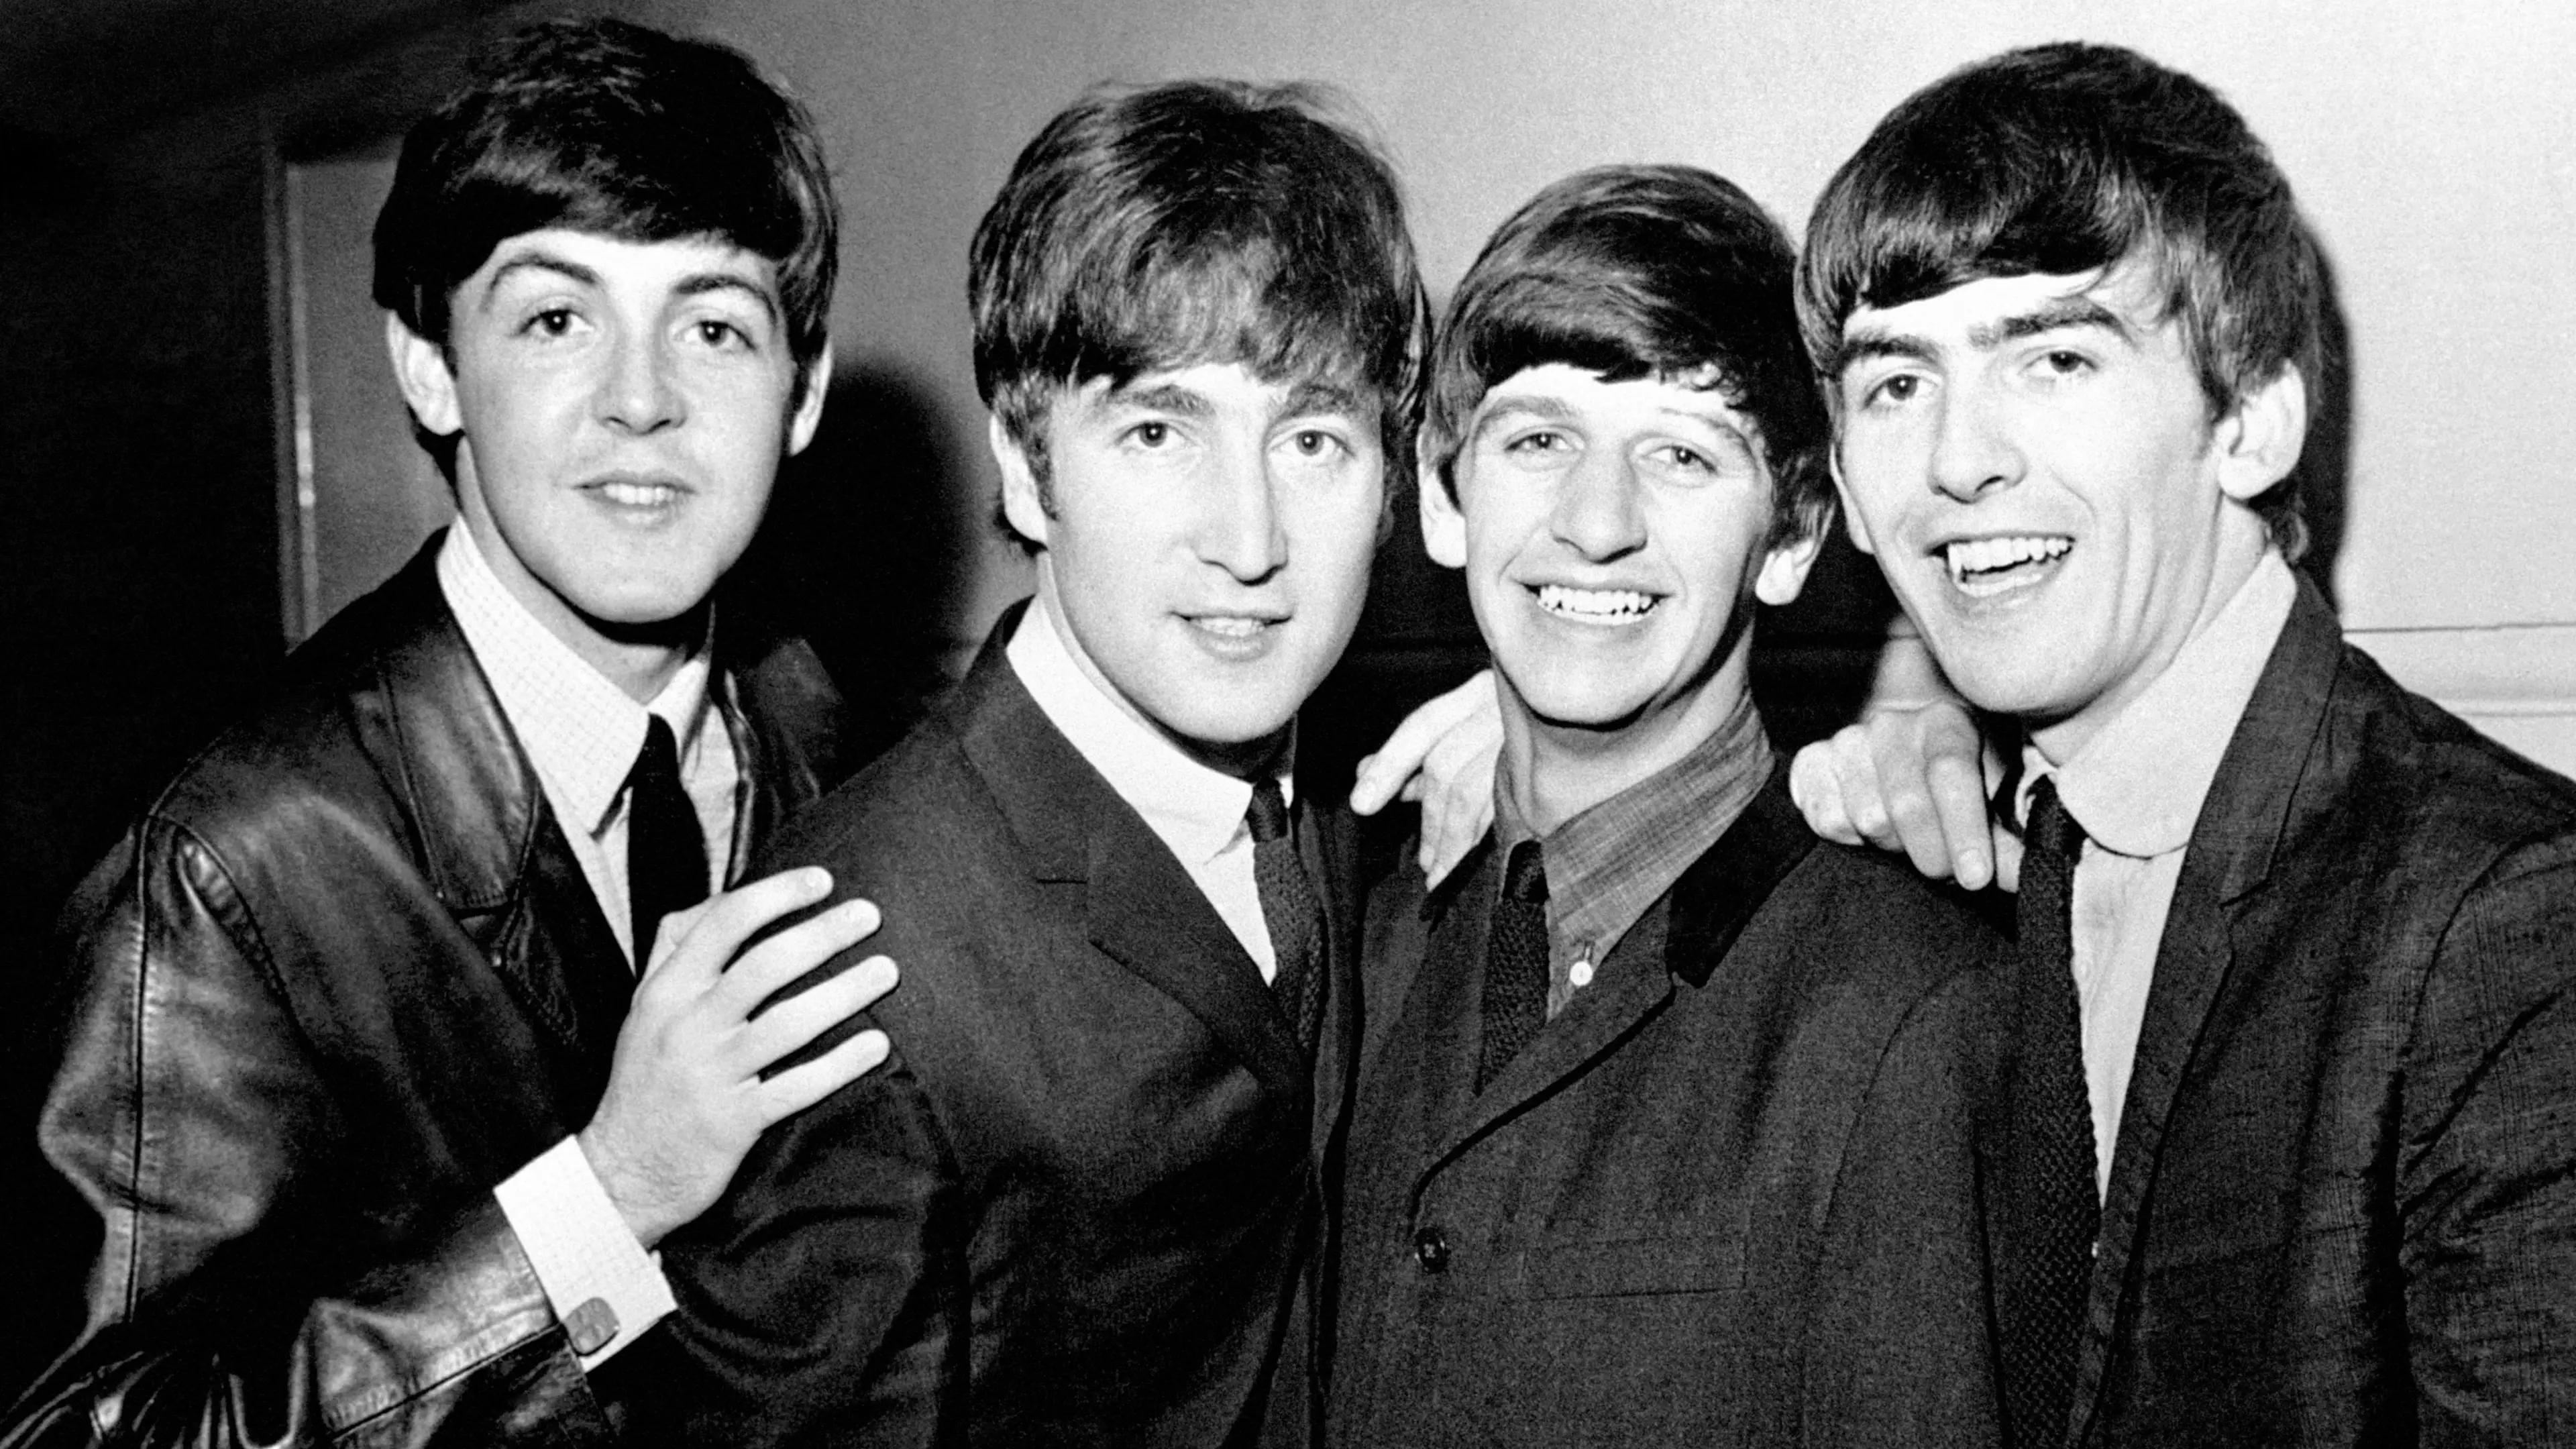 Peter Jackson's Beatles Documentary To Be Released On 4 September